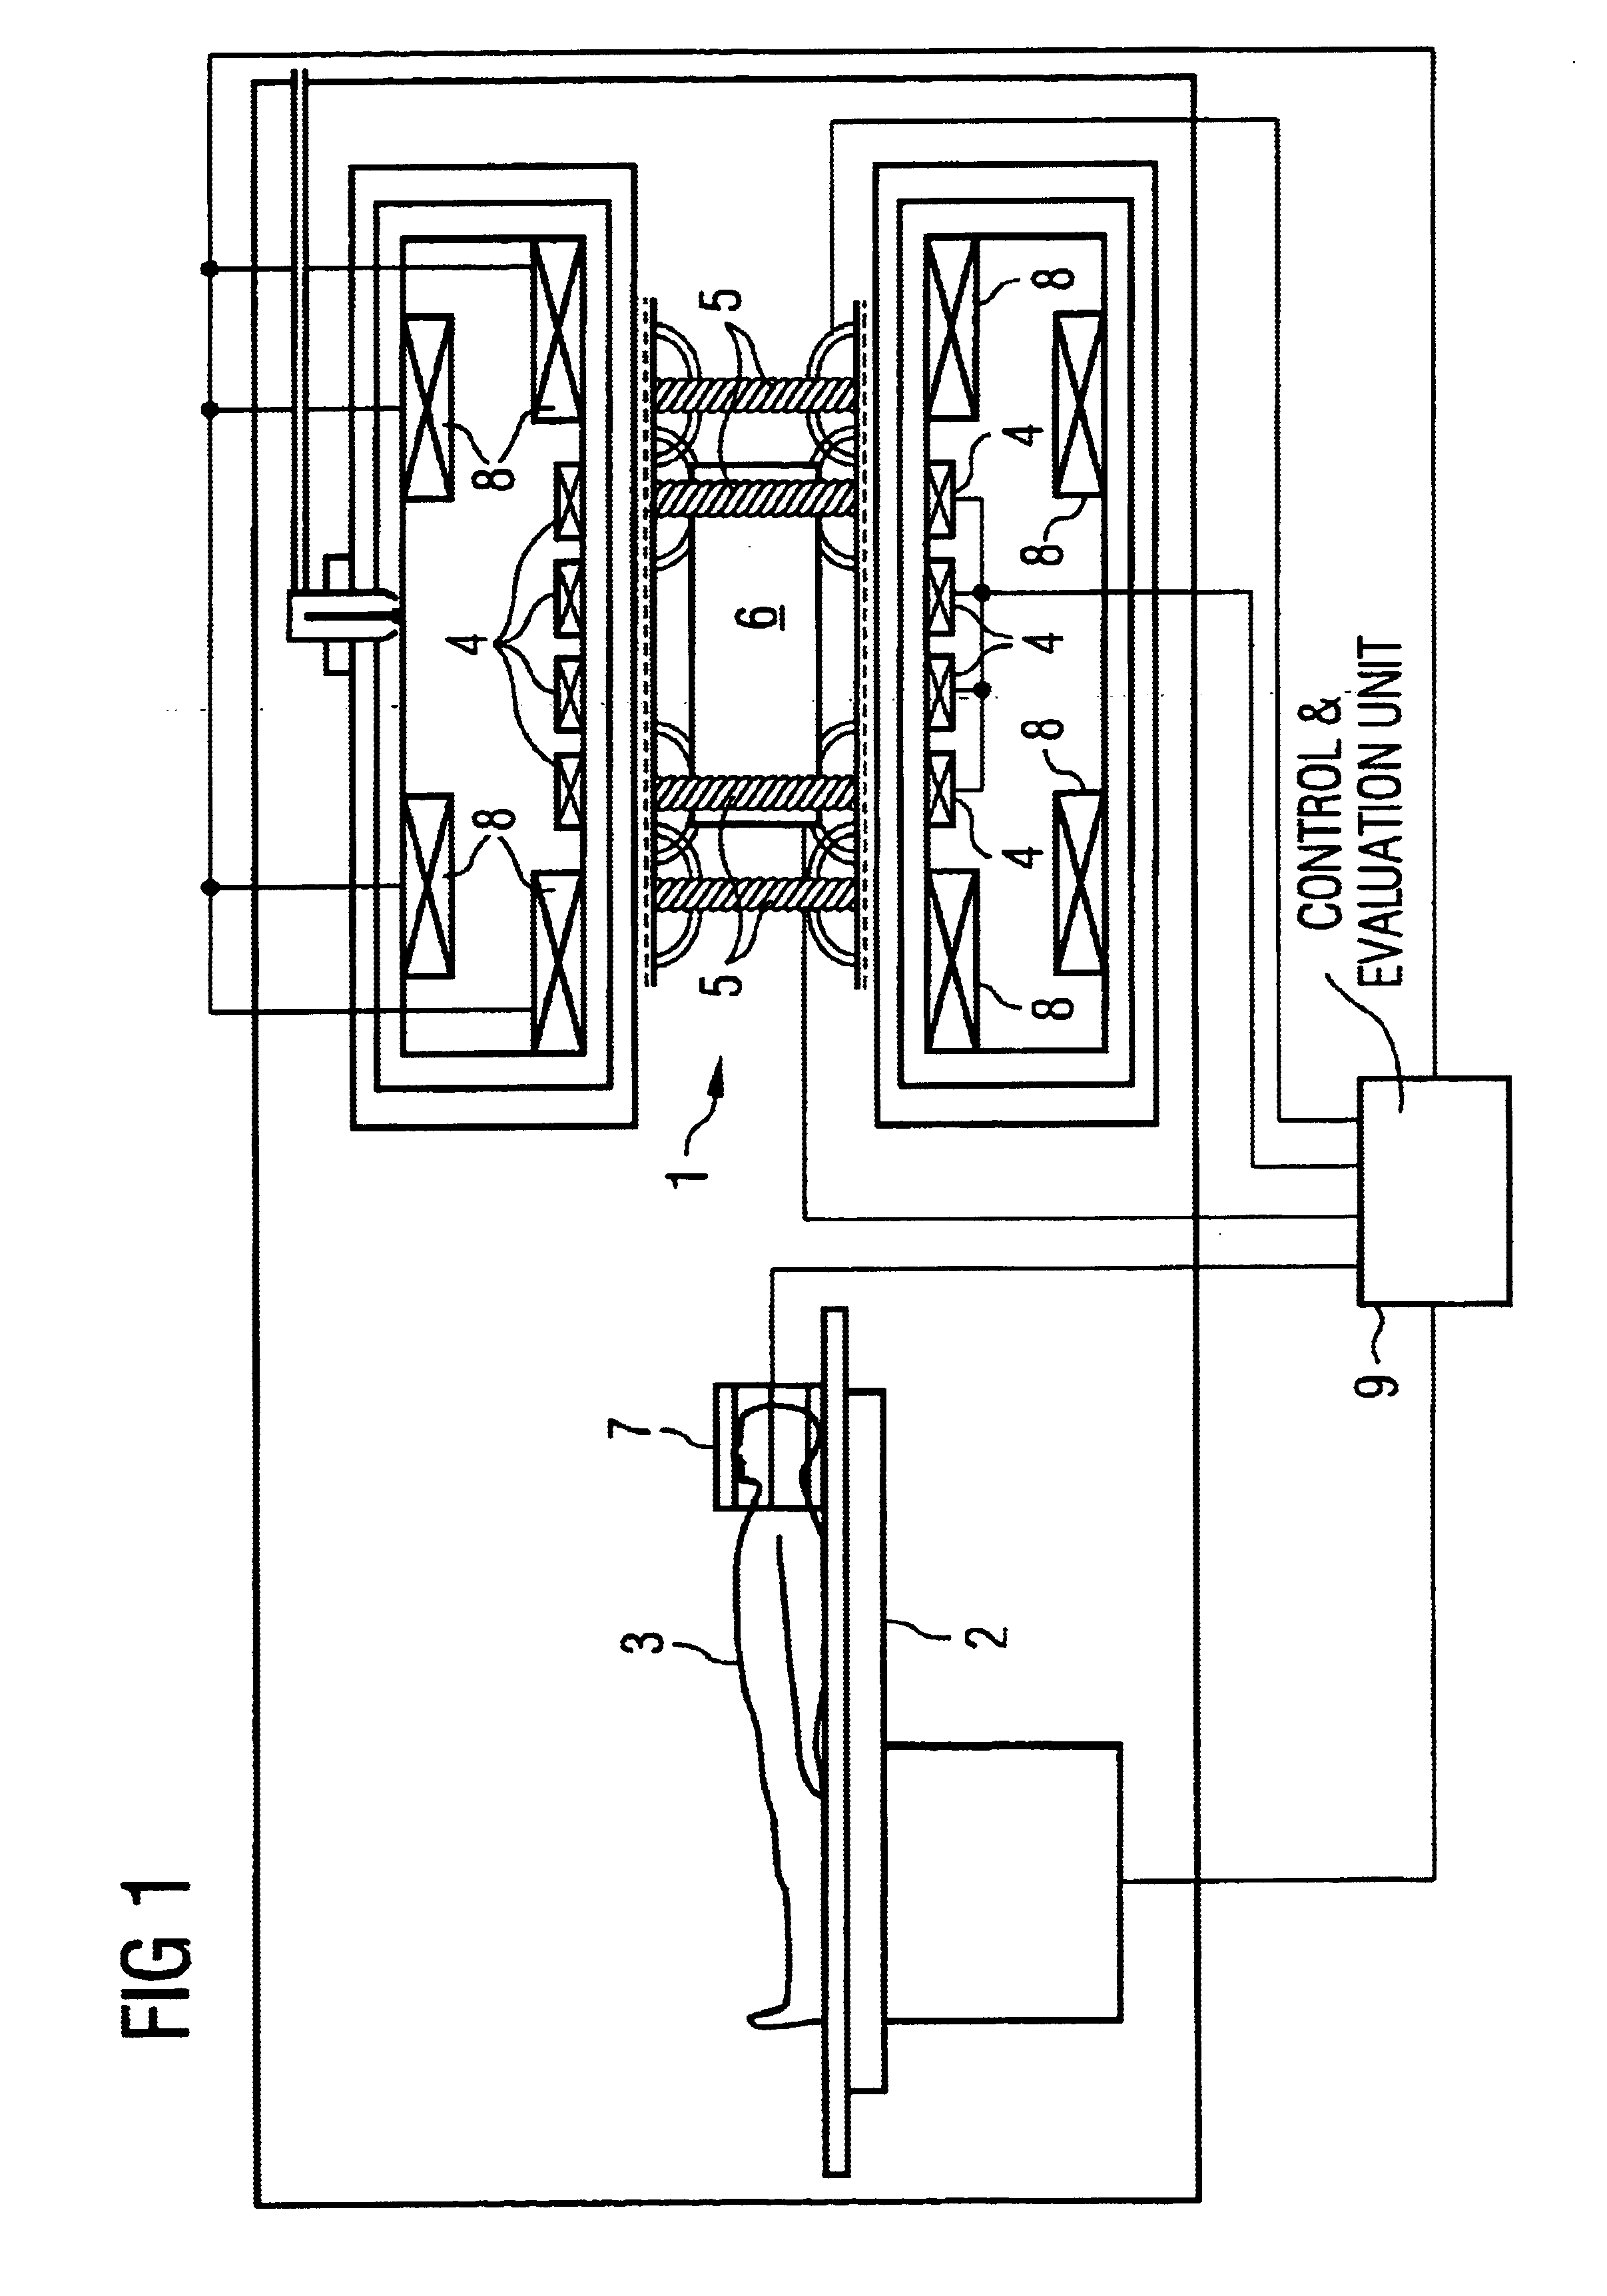 Radio-frequency antenna for a magnetic resonance system